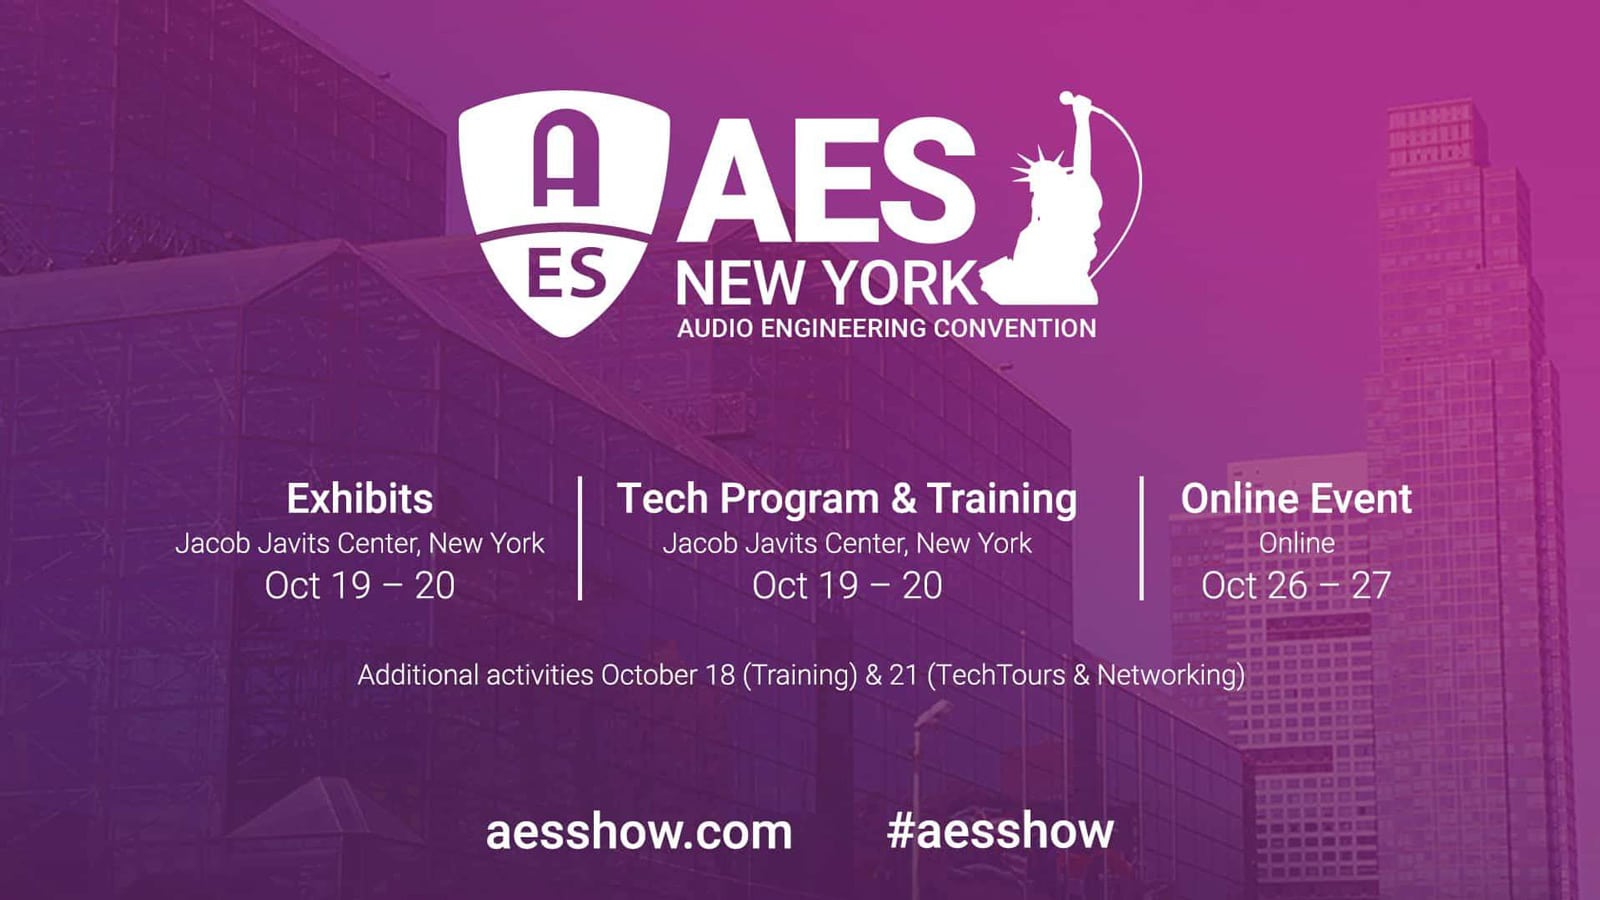 Join Meyer Sound at AES 2022